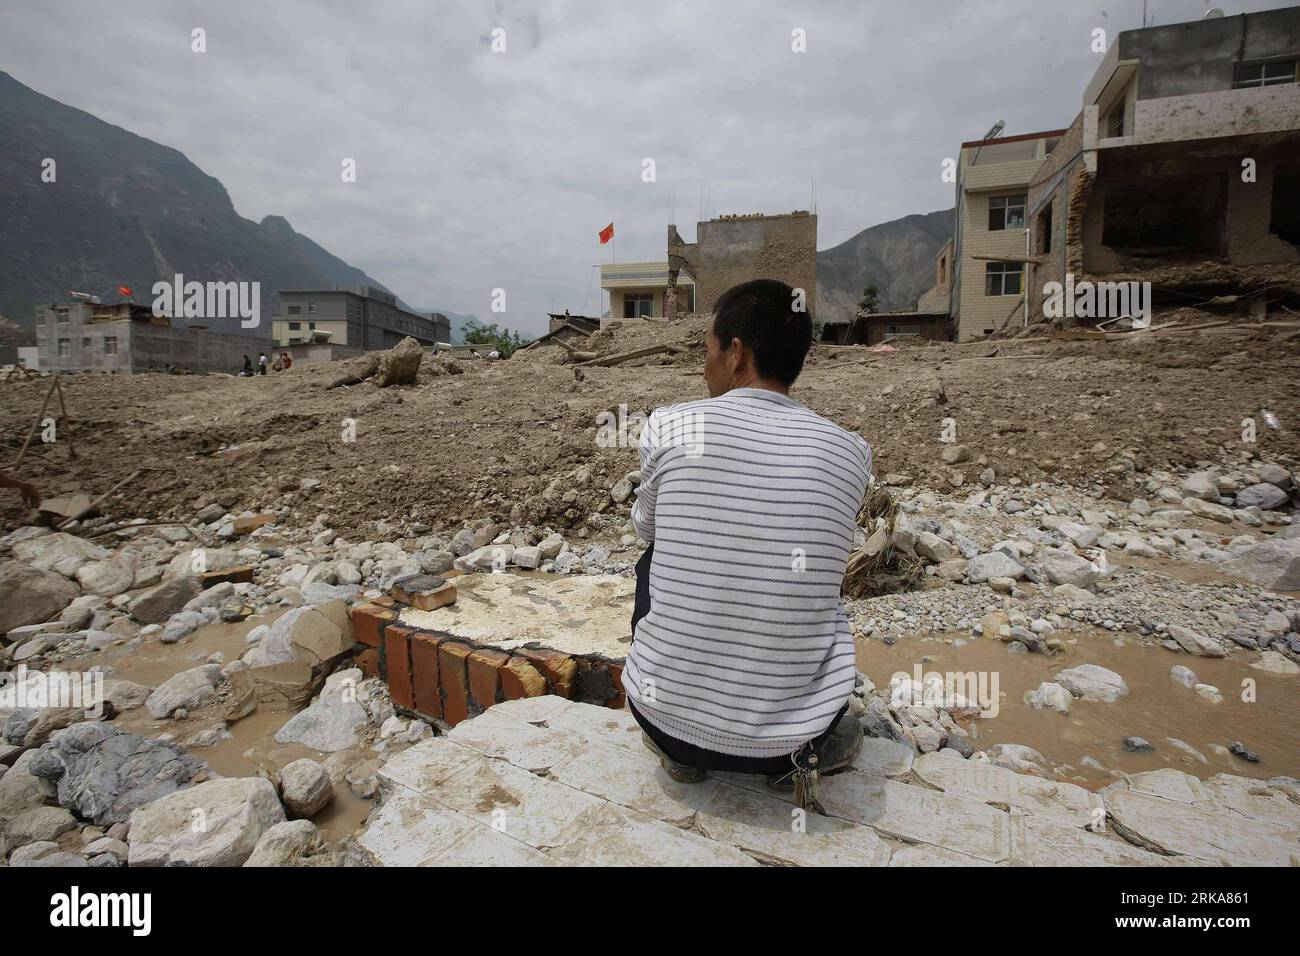 Bildnummer: 54284968  Datum: 09.08.2010  Copyright: imago/Xinhua ZHOUQU, Aug. 9, 2010 (Xinhua) -- A man rests on a piece of collapsed wall in landslide-hit Zhouqu County, Gannan Tibetan Autonomous Prefecture in northwest China s Gansu Province, Aug. 9, 2010. The death toll from rain-triggered mudslides in Zhouqu County has risen to 137 as of 4:07 p.m. Monday, with 1,348 others still missing, said the provincial civil affairs department. Rescuers are racing against time in the search for survivors in the mudslide-flattened Zhouqu. (Xinhua/Xing Guangli) (cxy) CHINA-GANSU-ZHOUQU-LANDSLIDE-RESCUE Stock Photo